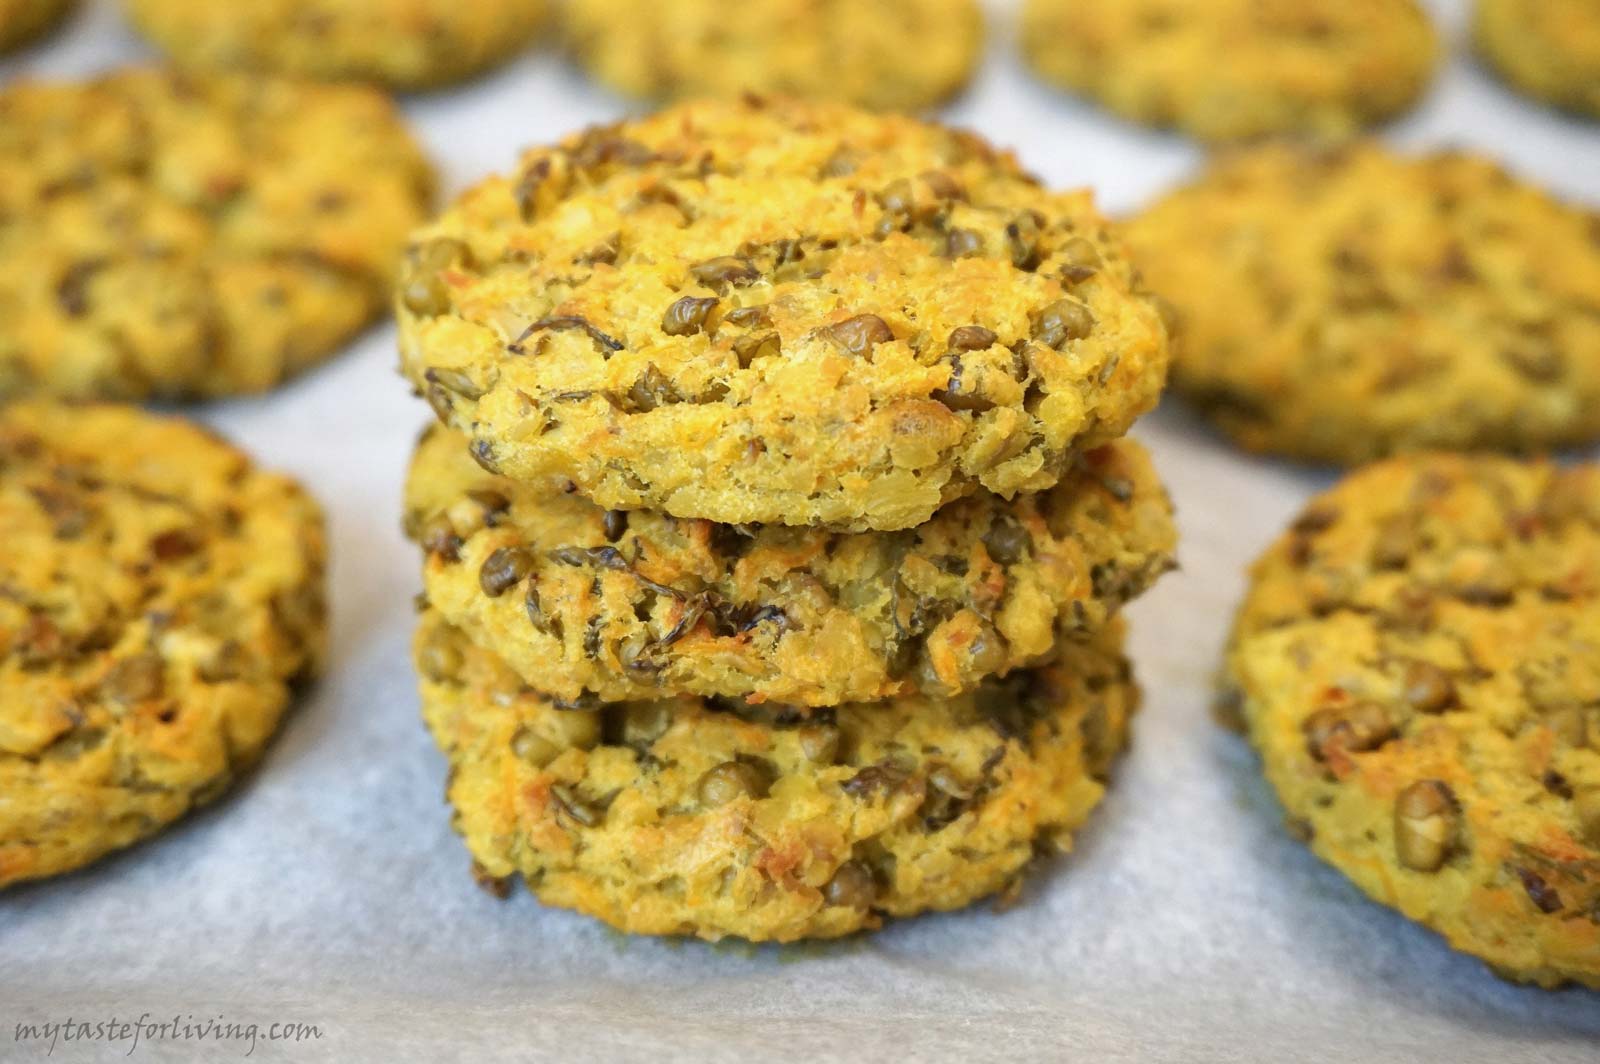 Delicious vegan recipe for baked mung bean burgers with vegetables. They are great complemented with hummus and fresh salad.